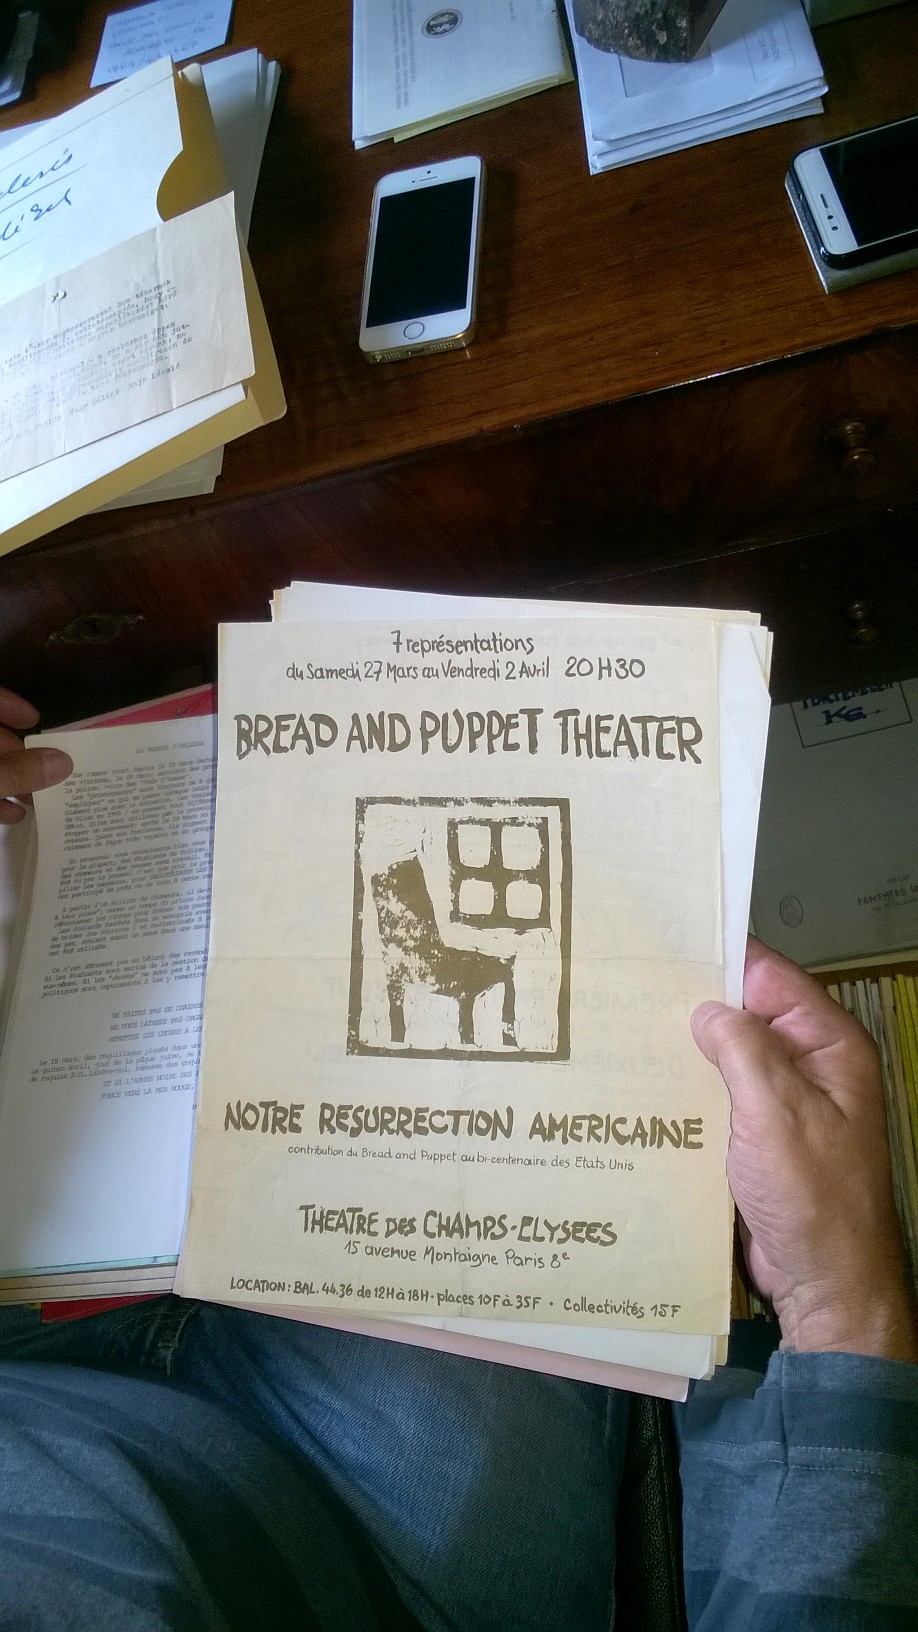 Bread and Puppet Theater’ s leaflet